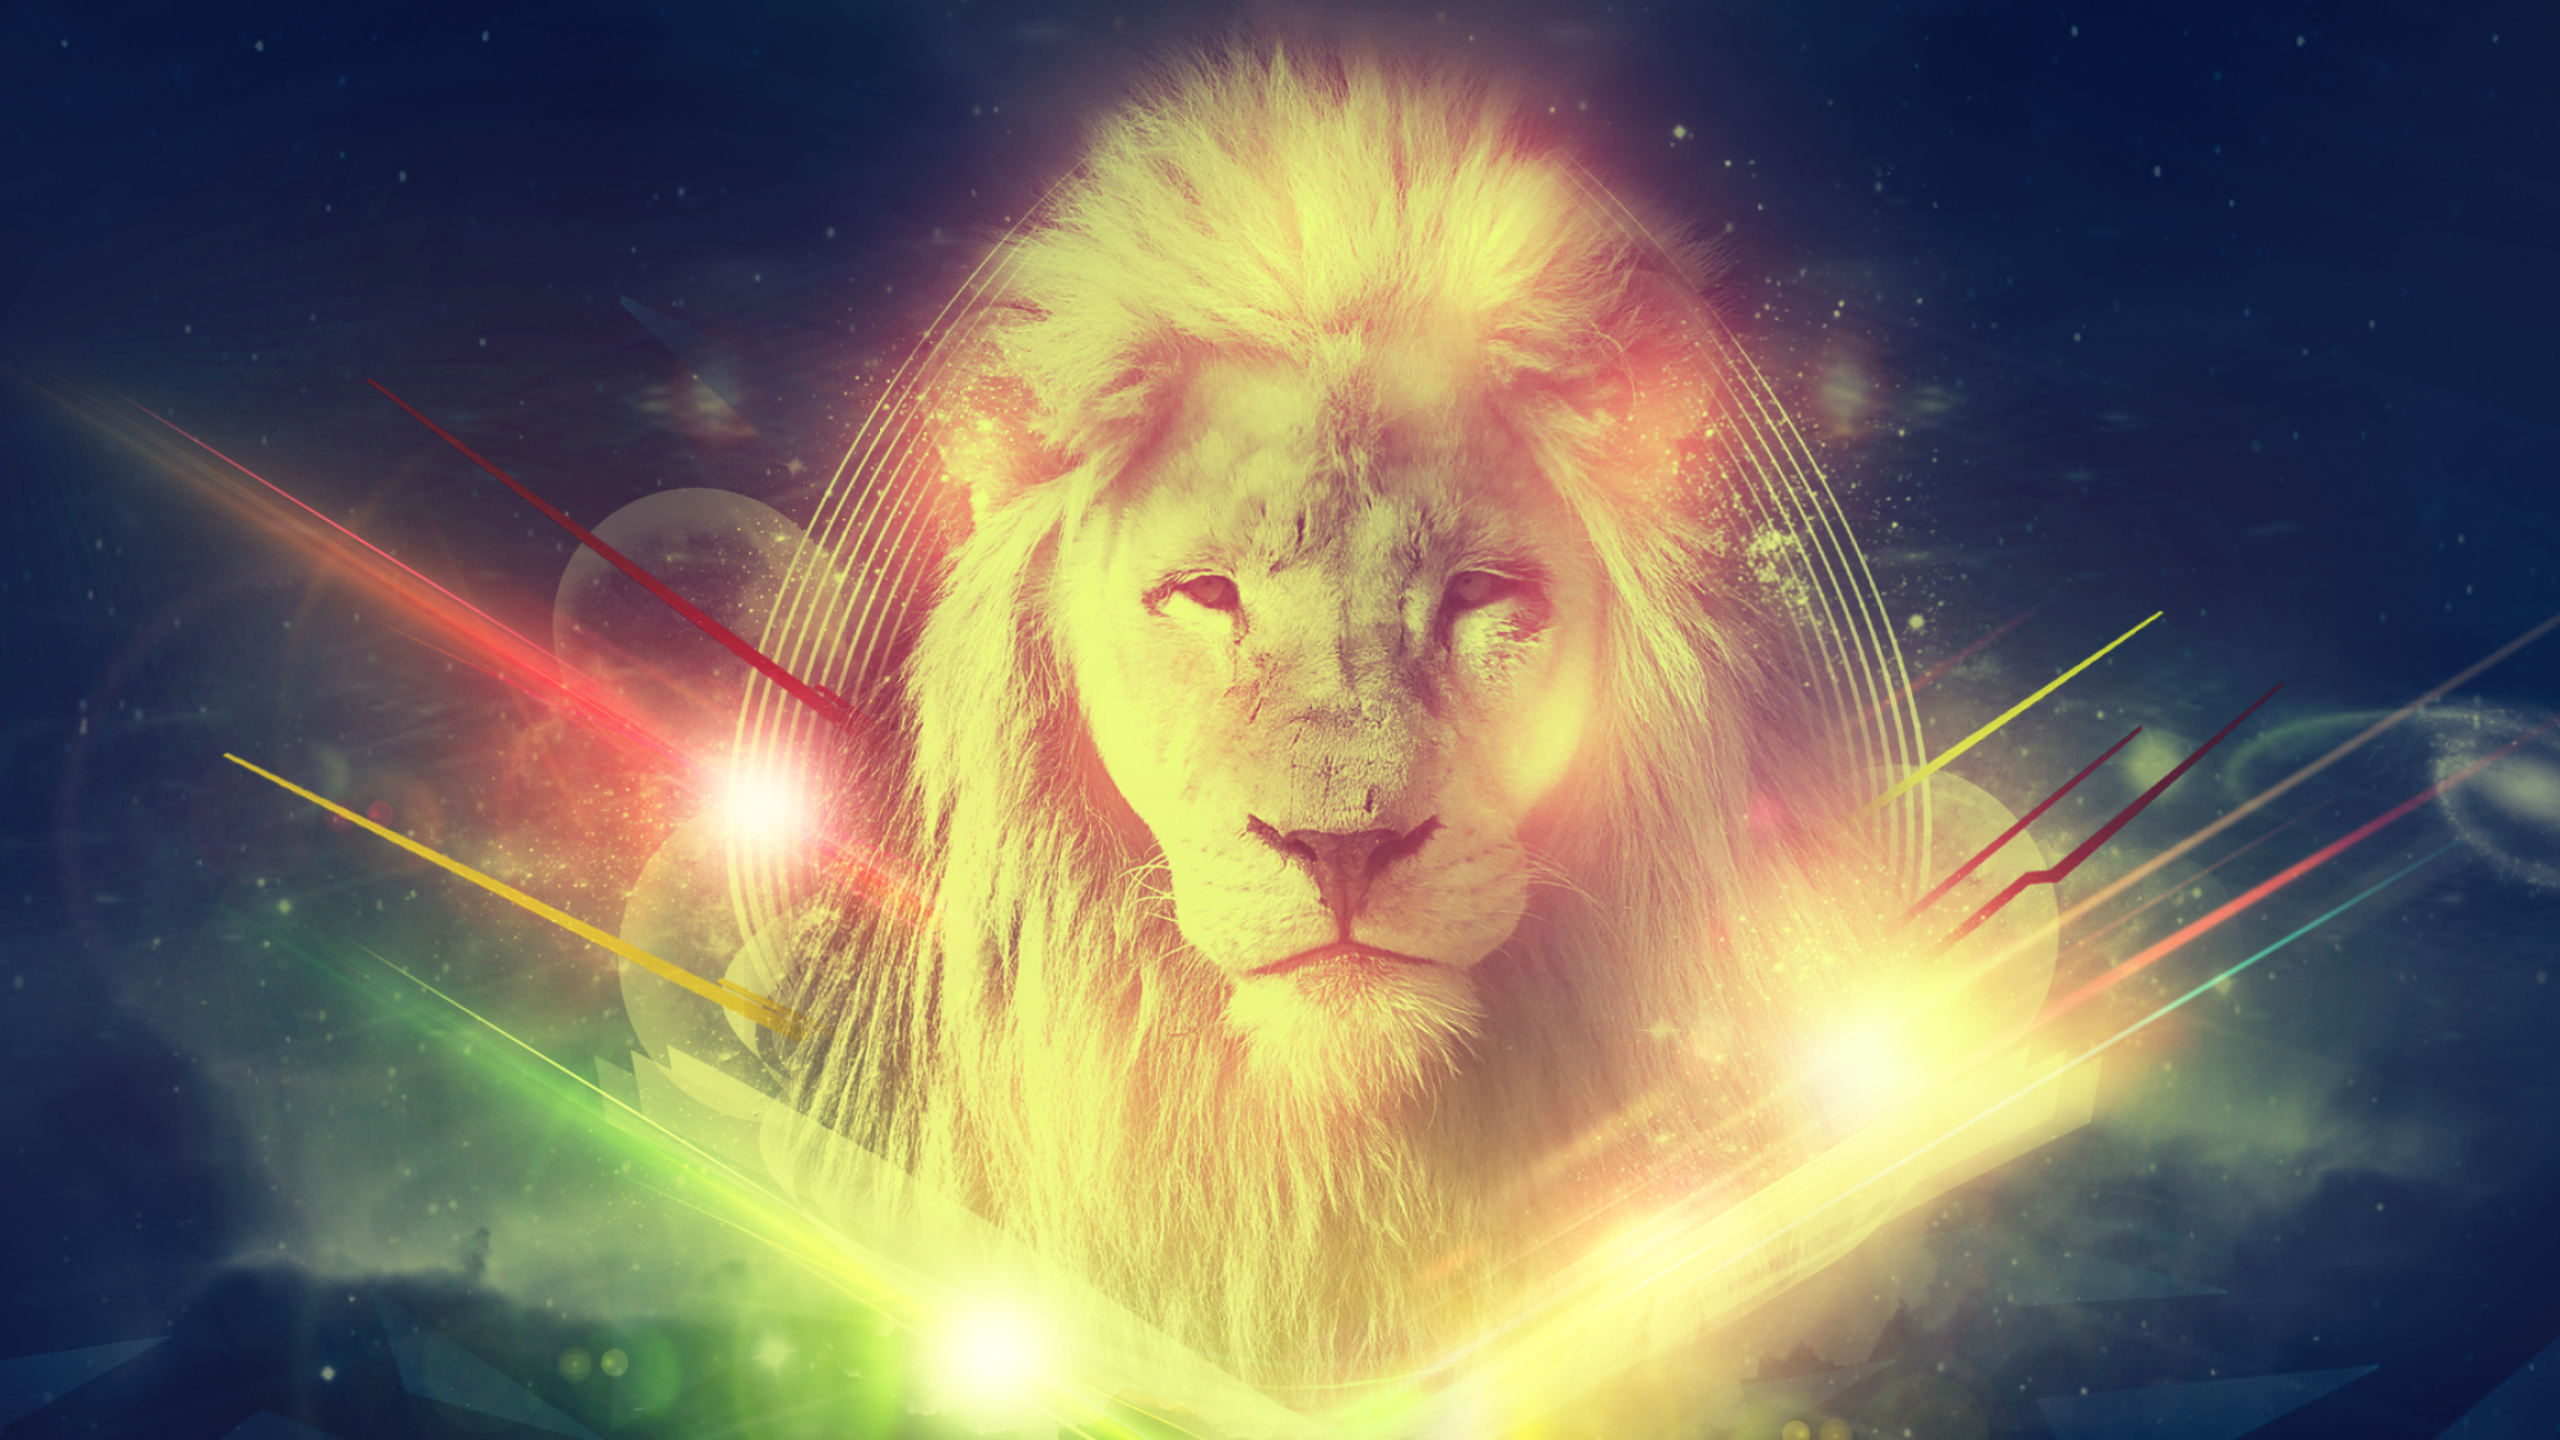 2560x1440 Free download Image search Homepage Lion bob marley lion wallpapers [] for your Desktop, Mobile \u0026 Tablet | Explore 49+ Bob Marley Lion Wallpaper | Bob Marley Hd Wallpaper, Reggae Lion Wallpaper